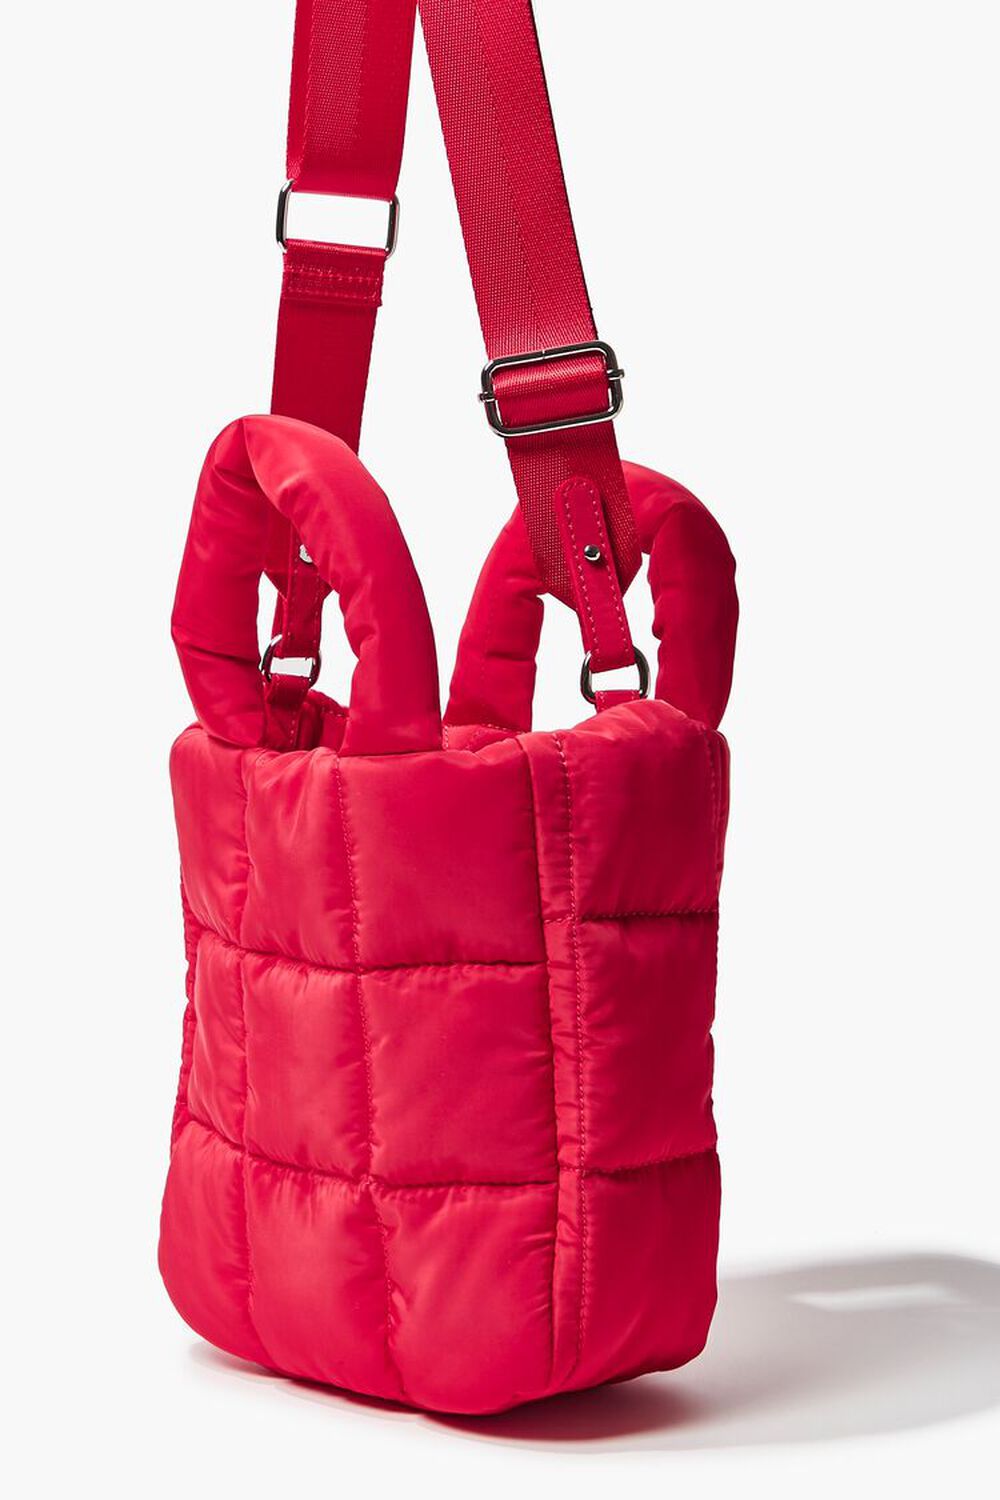 RED Quilted Tote Bag, image 3